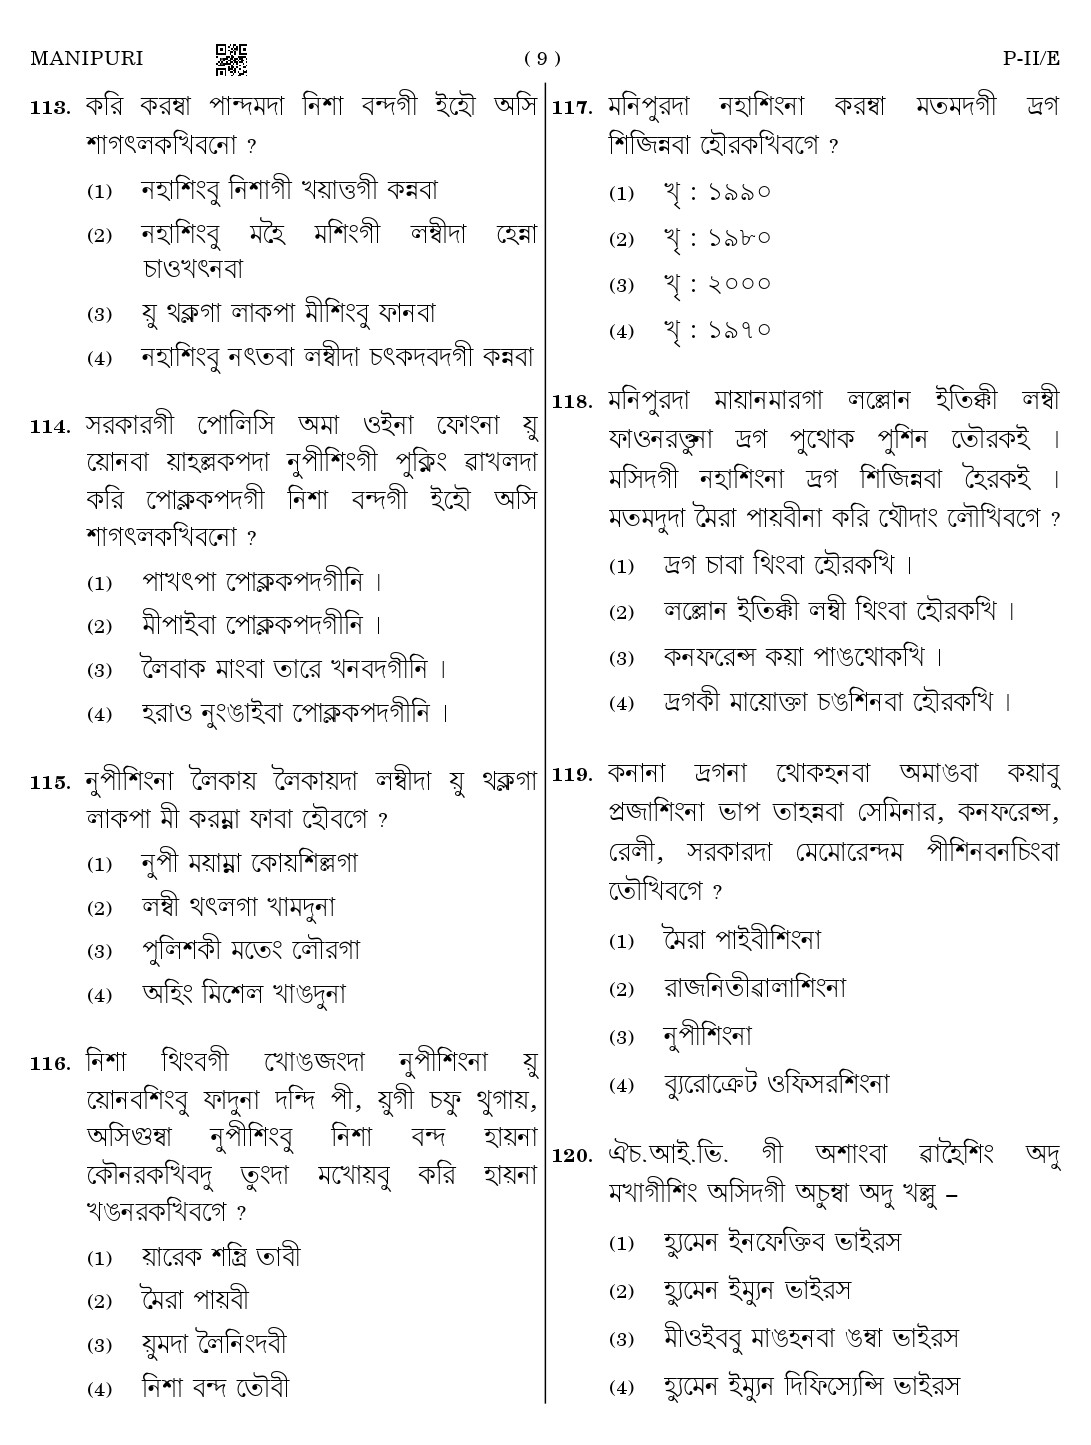 CTET August 2023 Manipuri Language Supplement Paper II Part IV and V 9